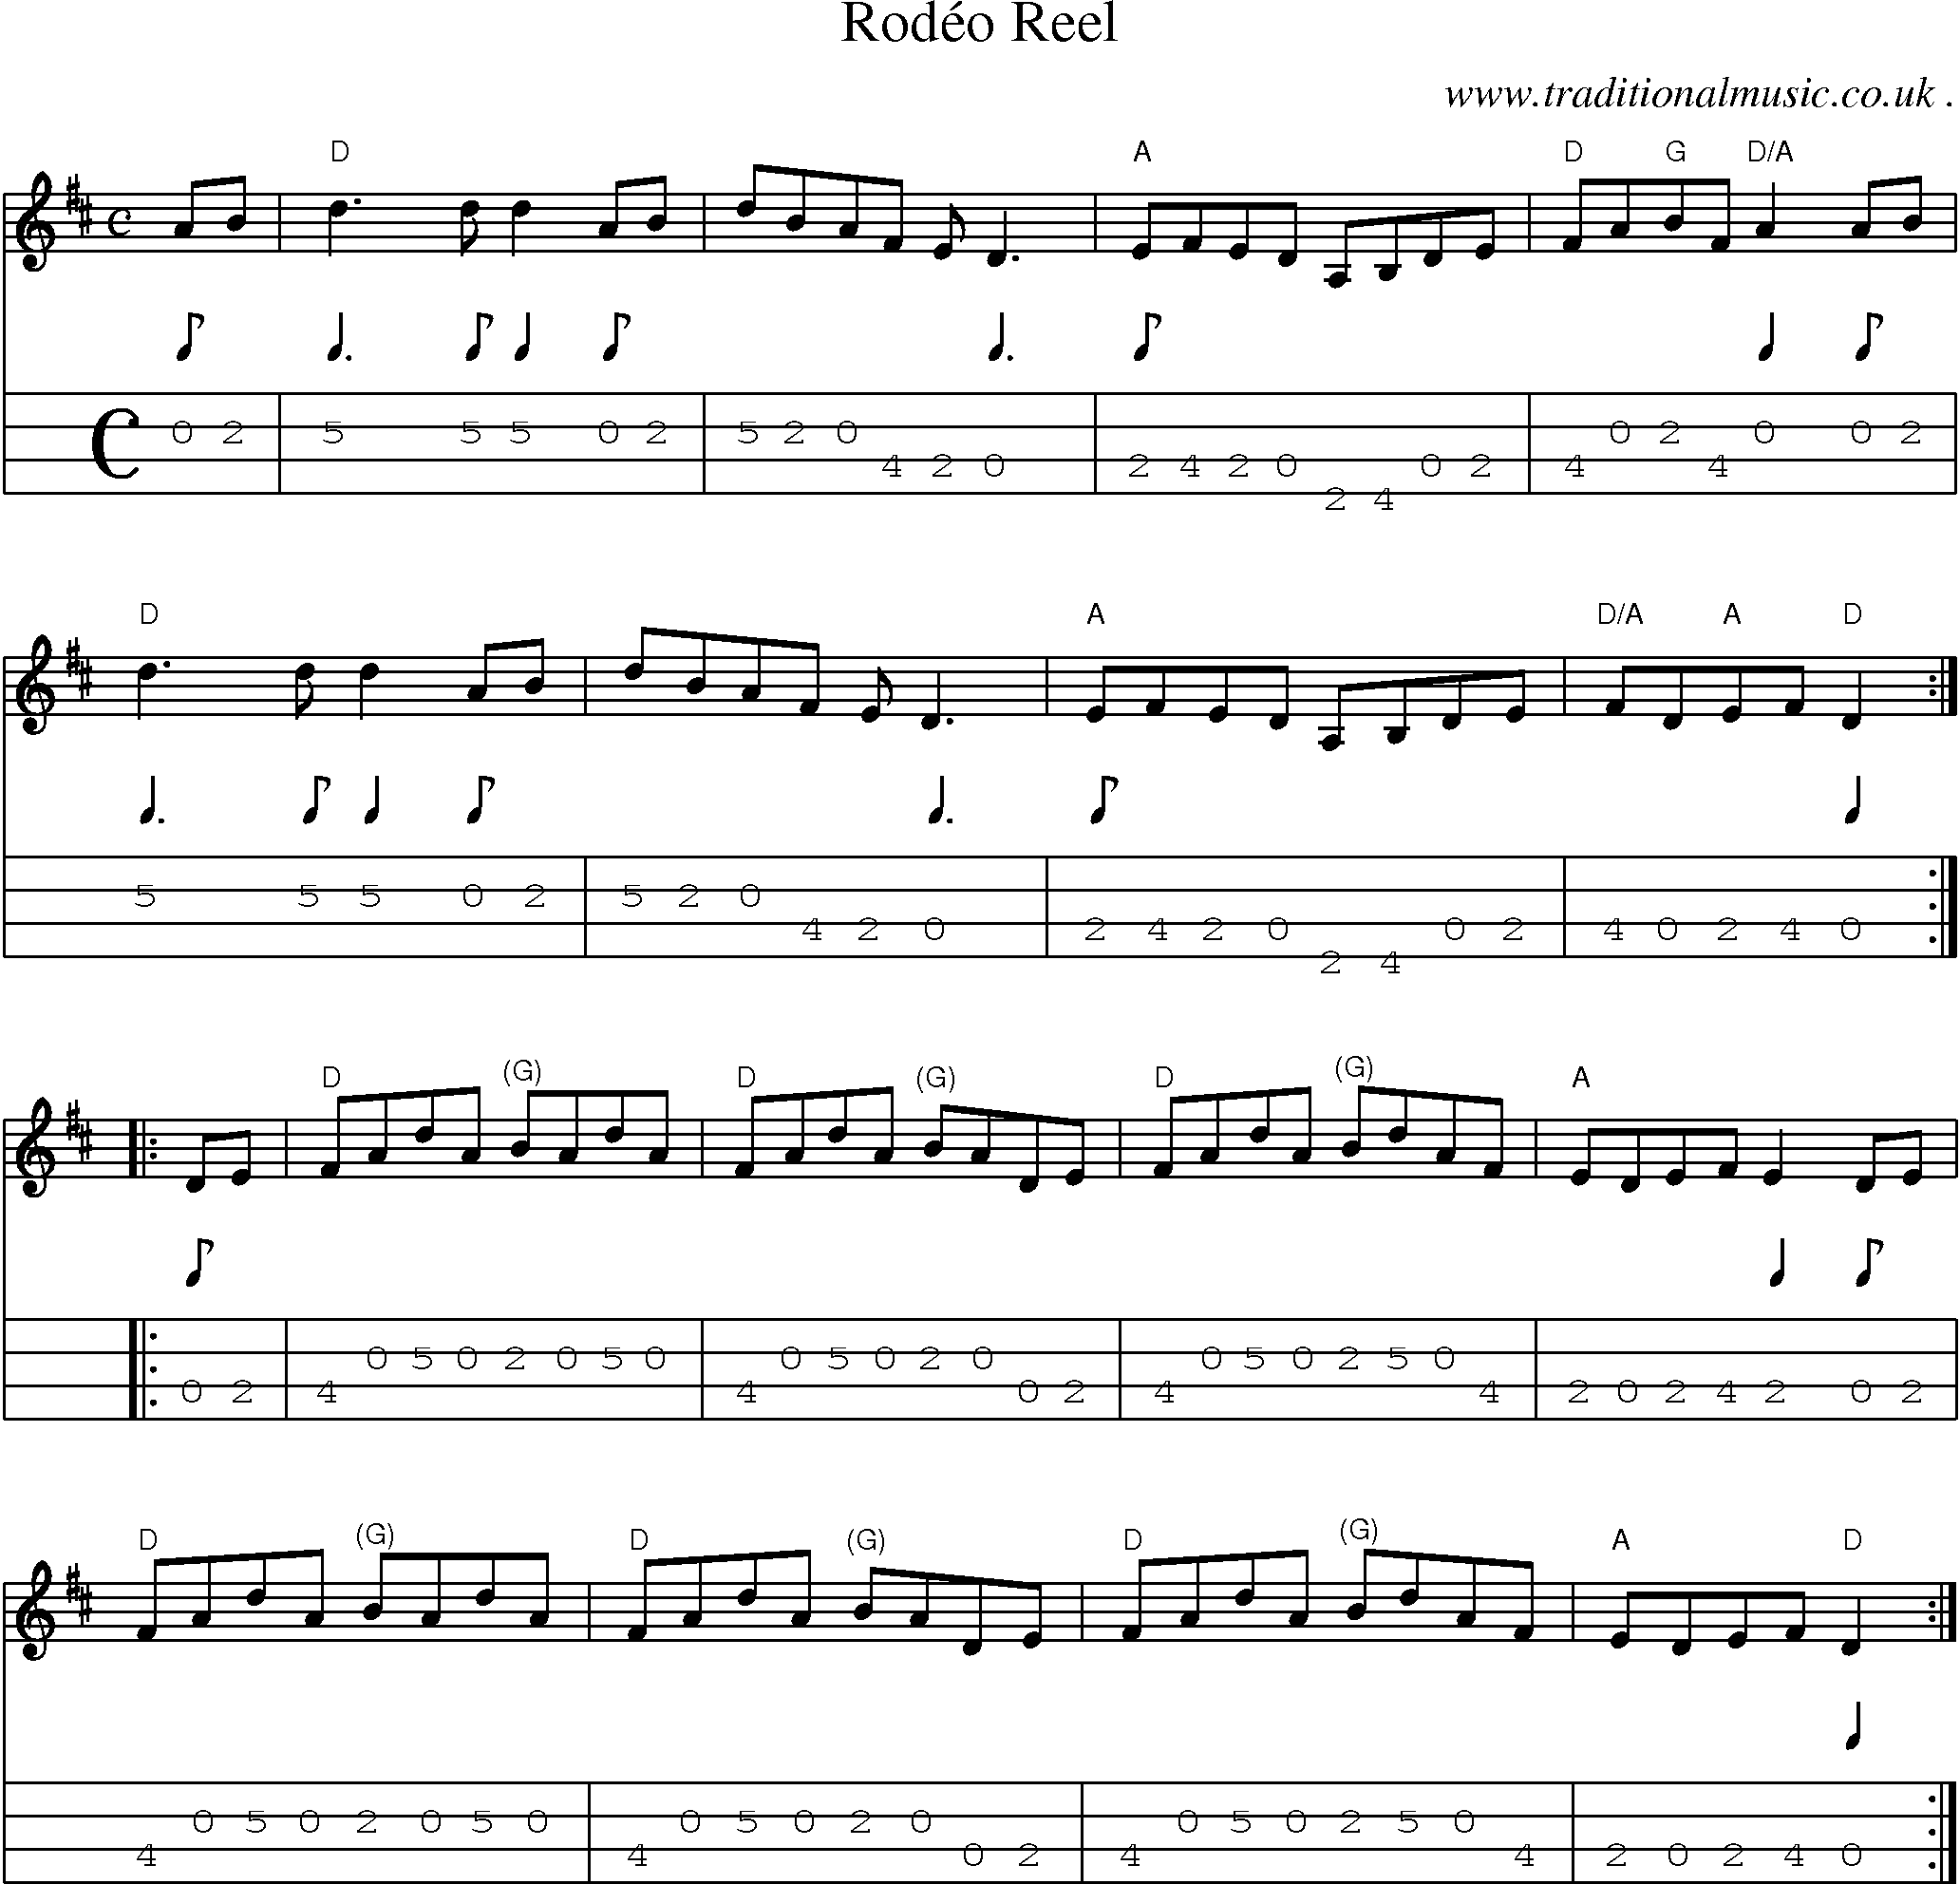 Music Score and Guitar Tabs for Rodeo Reel